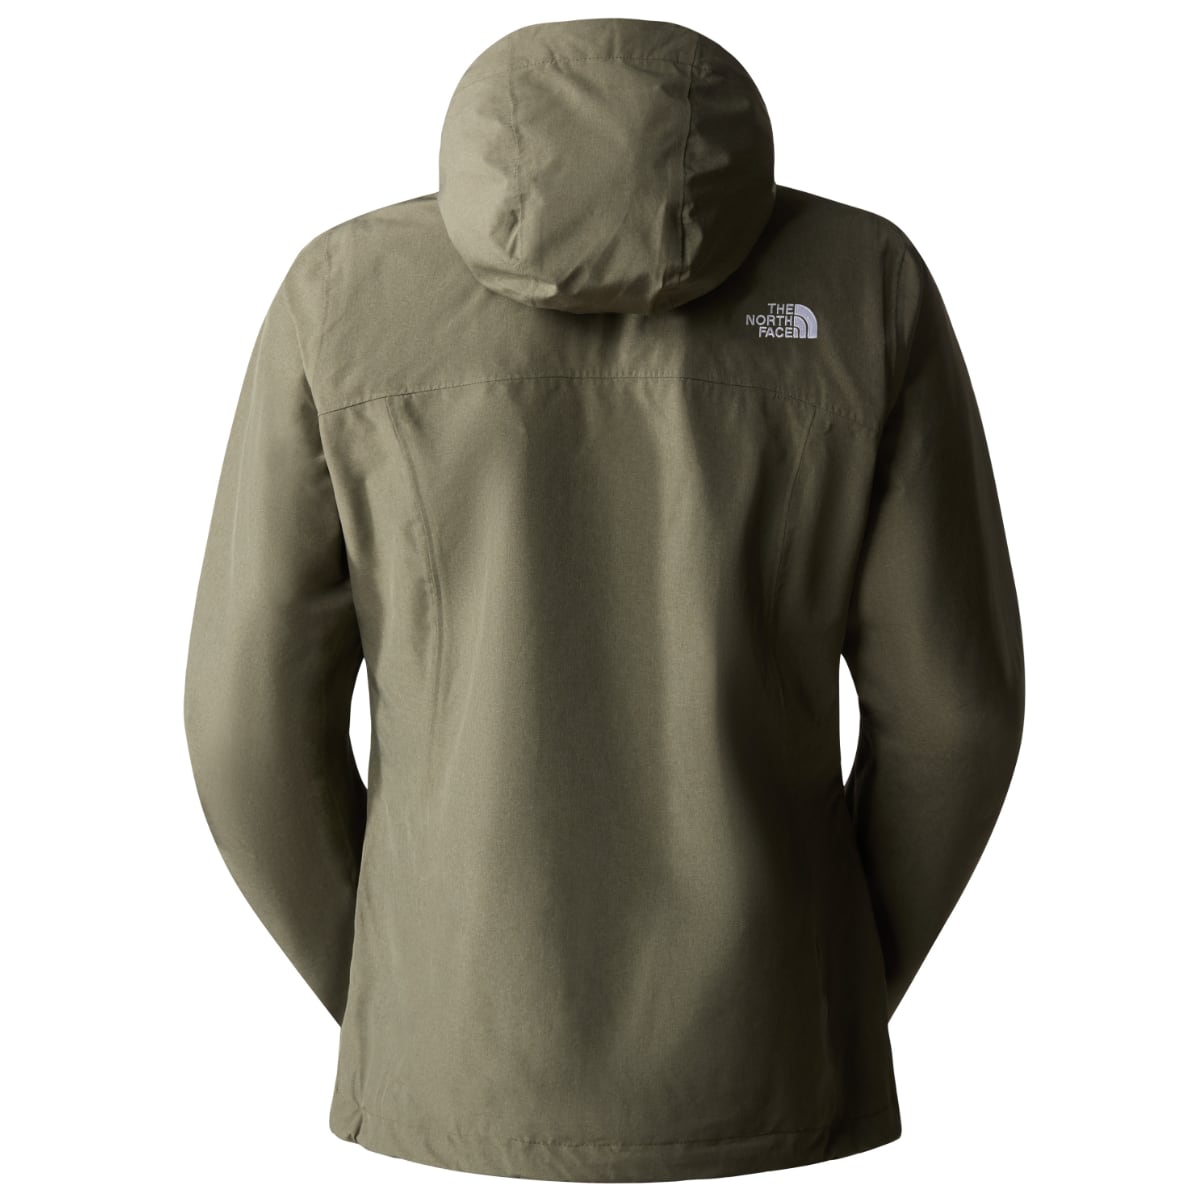 The North Face Sangro Waterproof Women's Jacket | New Taupe Green